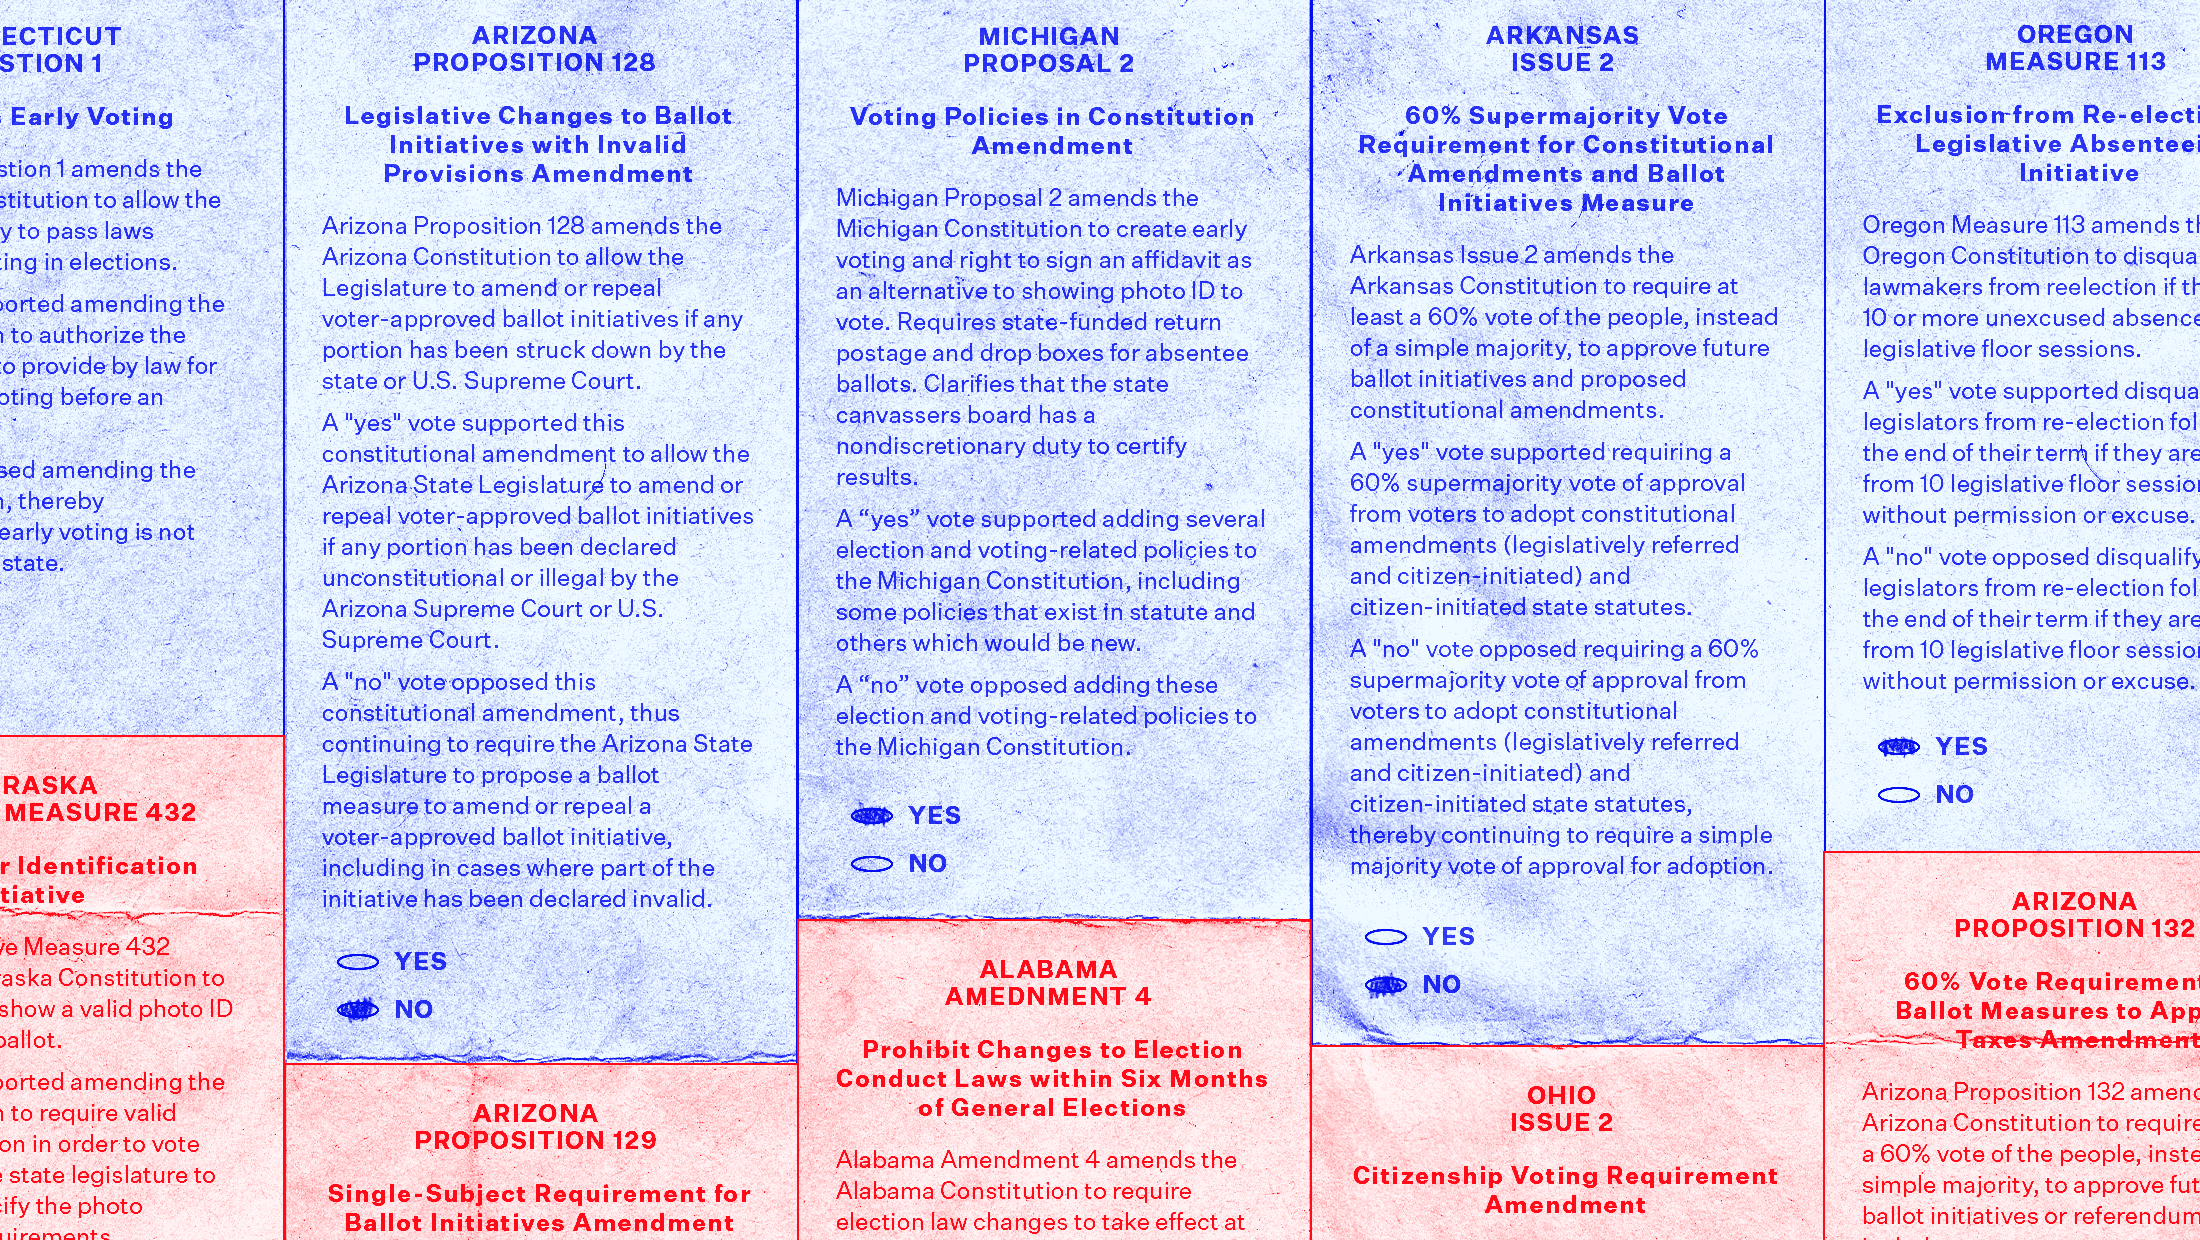 A collage of ballot measures referenced in the article, with measures that resulted in a good outcome shaded blue and measures that resulted in a bad outcome shaded red. The good outcomes take up a majority of the image.